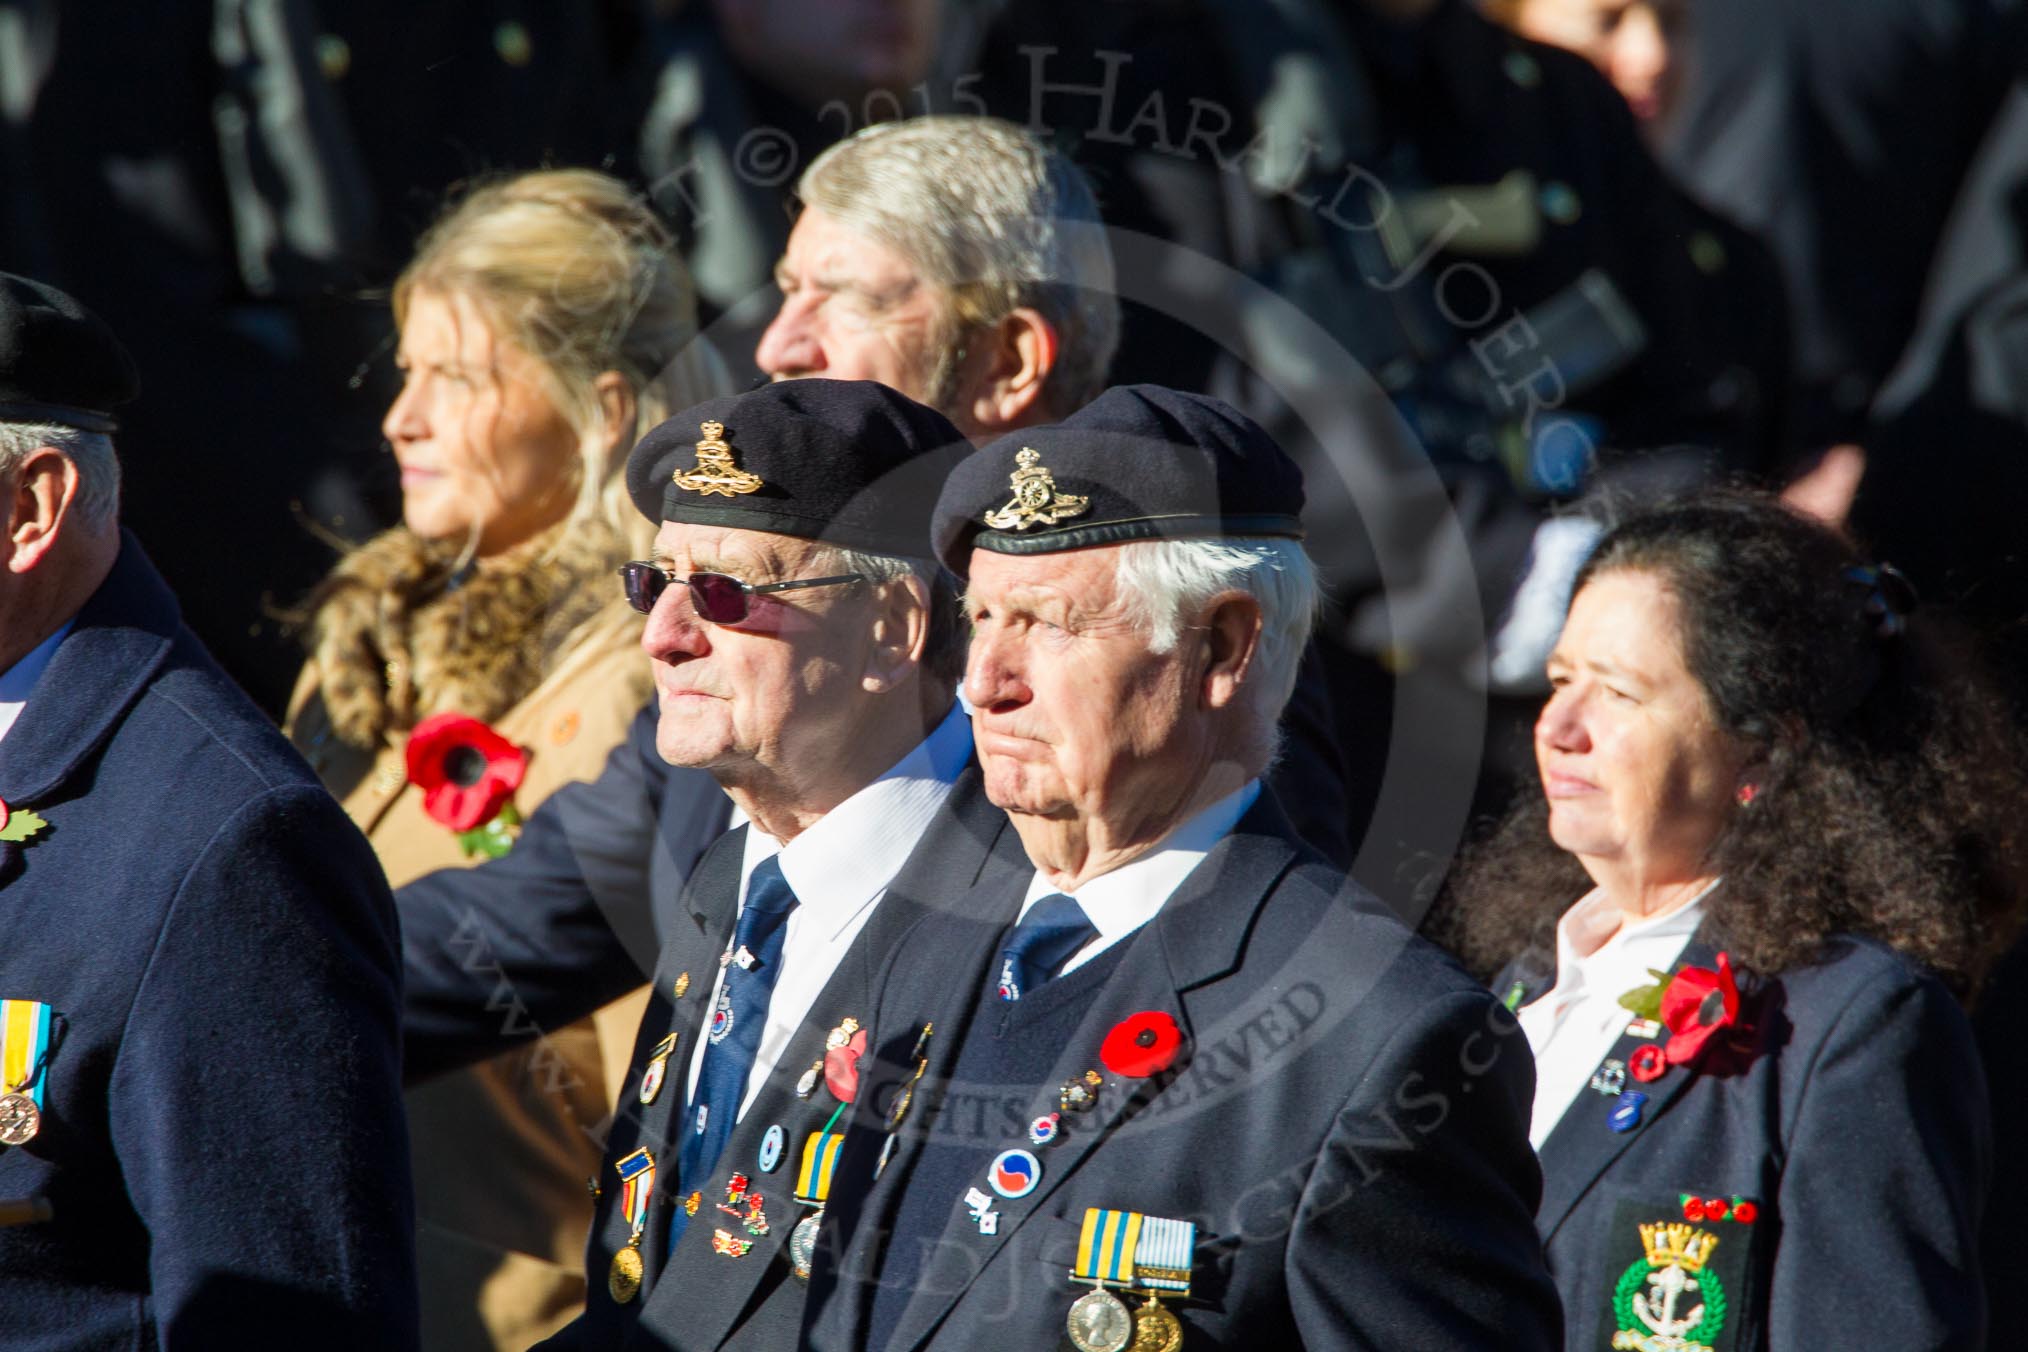 Remembrance Sunday Cenotaph March Past 2013: E41 - Broadsword Association..
Press stand opposite the Foreign Office building, Whitehall, London SW1,
London,
Greater London,
United Kingdom,
on 10 November 2013 at 11:49, image #730